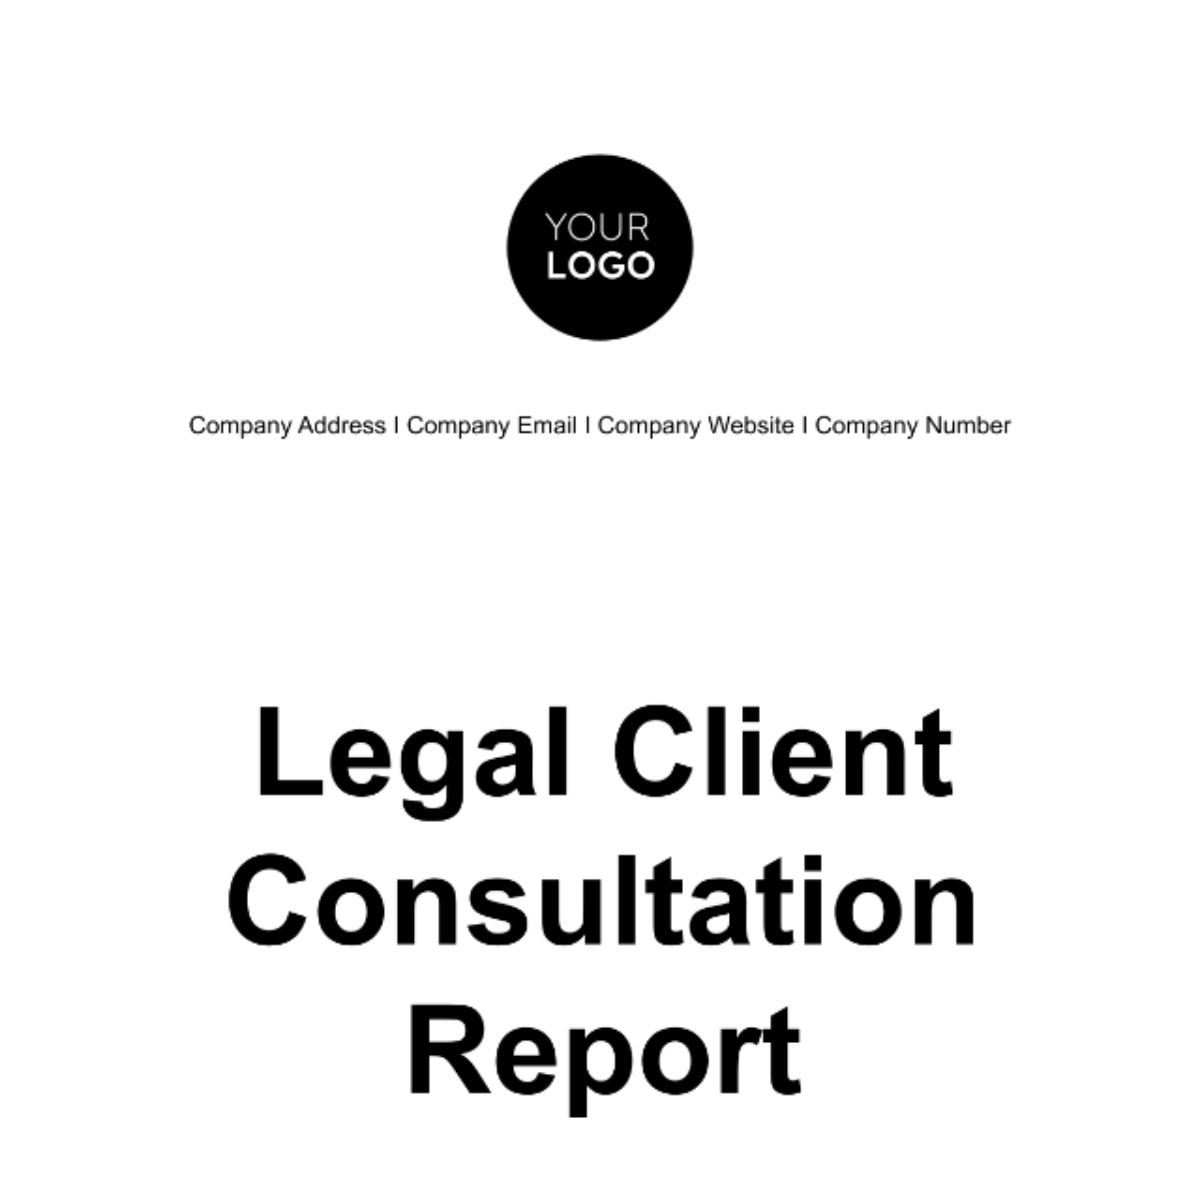 Free Legal Client Consultation Report Template